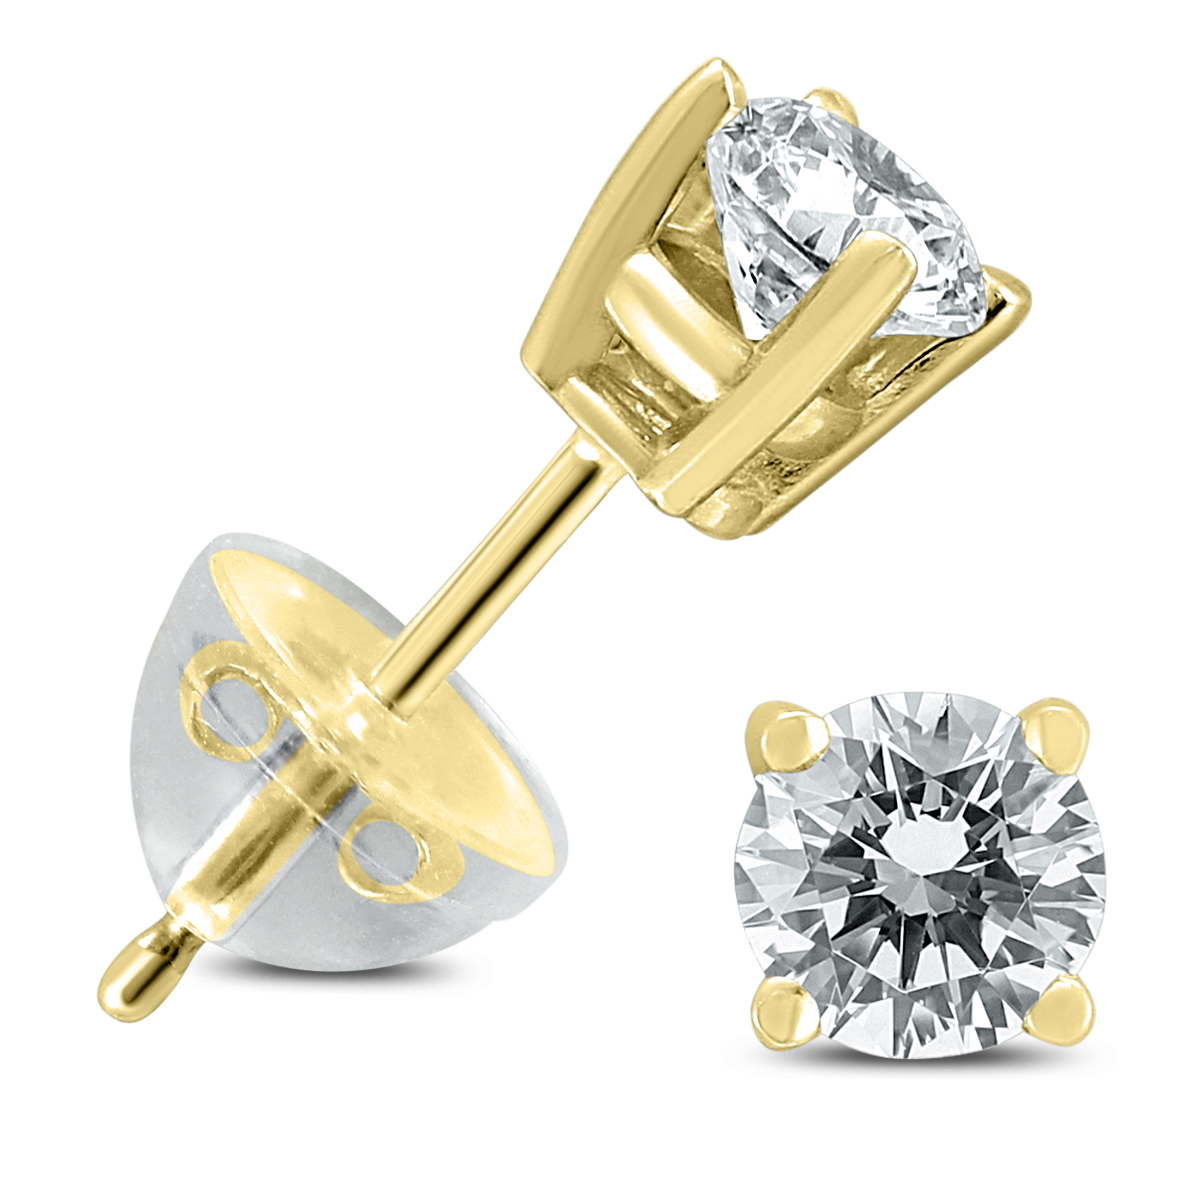 .50CTW Round Diamond Solitaire Stud Earrings In 14k Yellow Gold with Silicon Backs